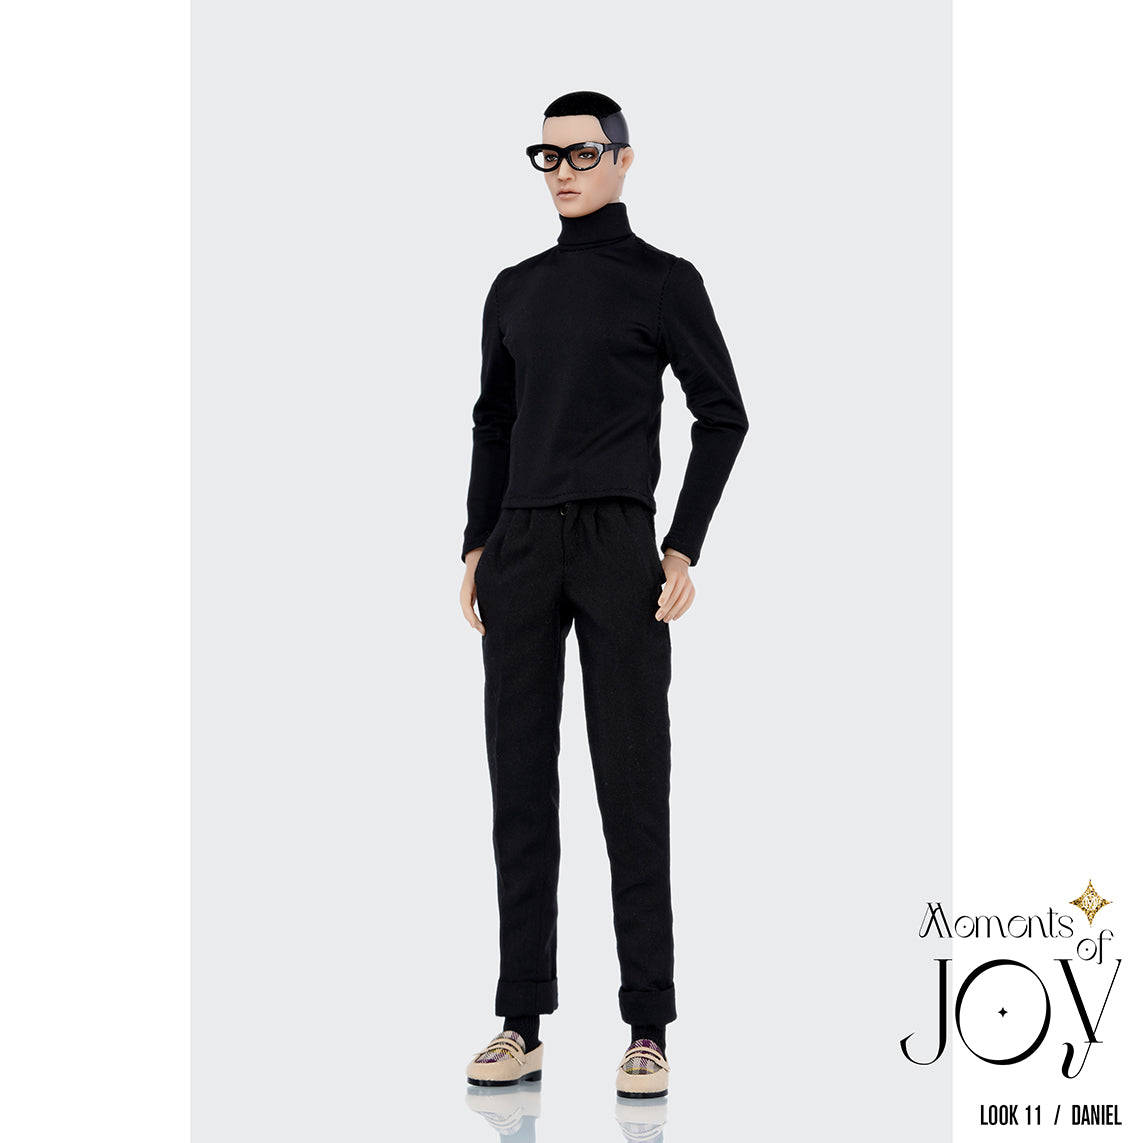 Muses Moments of Joy Men's Fashion Look 11